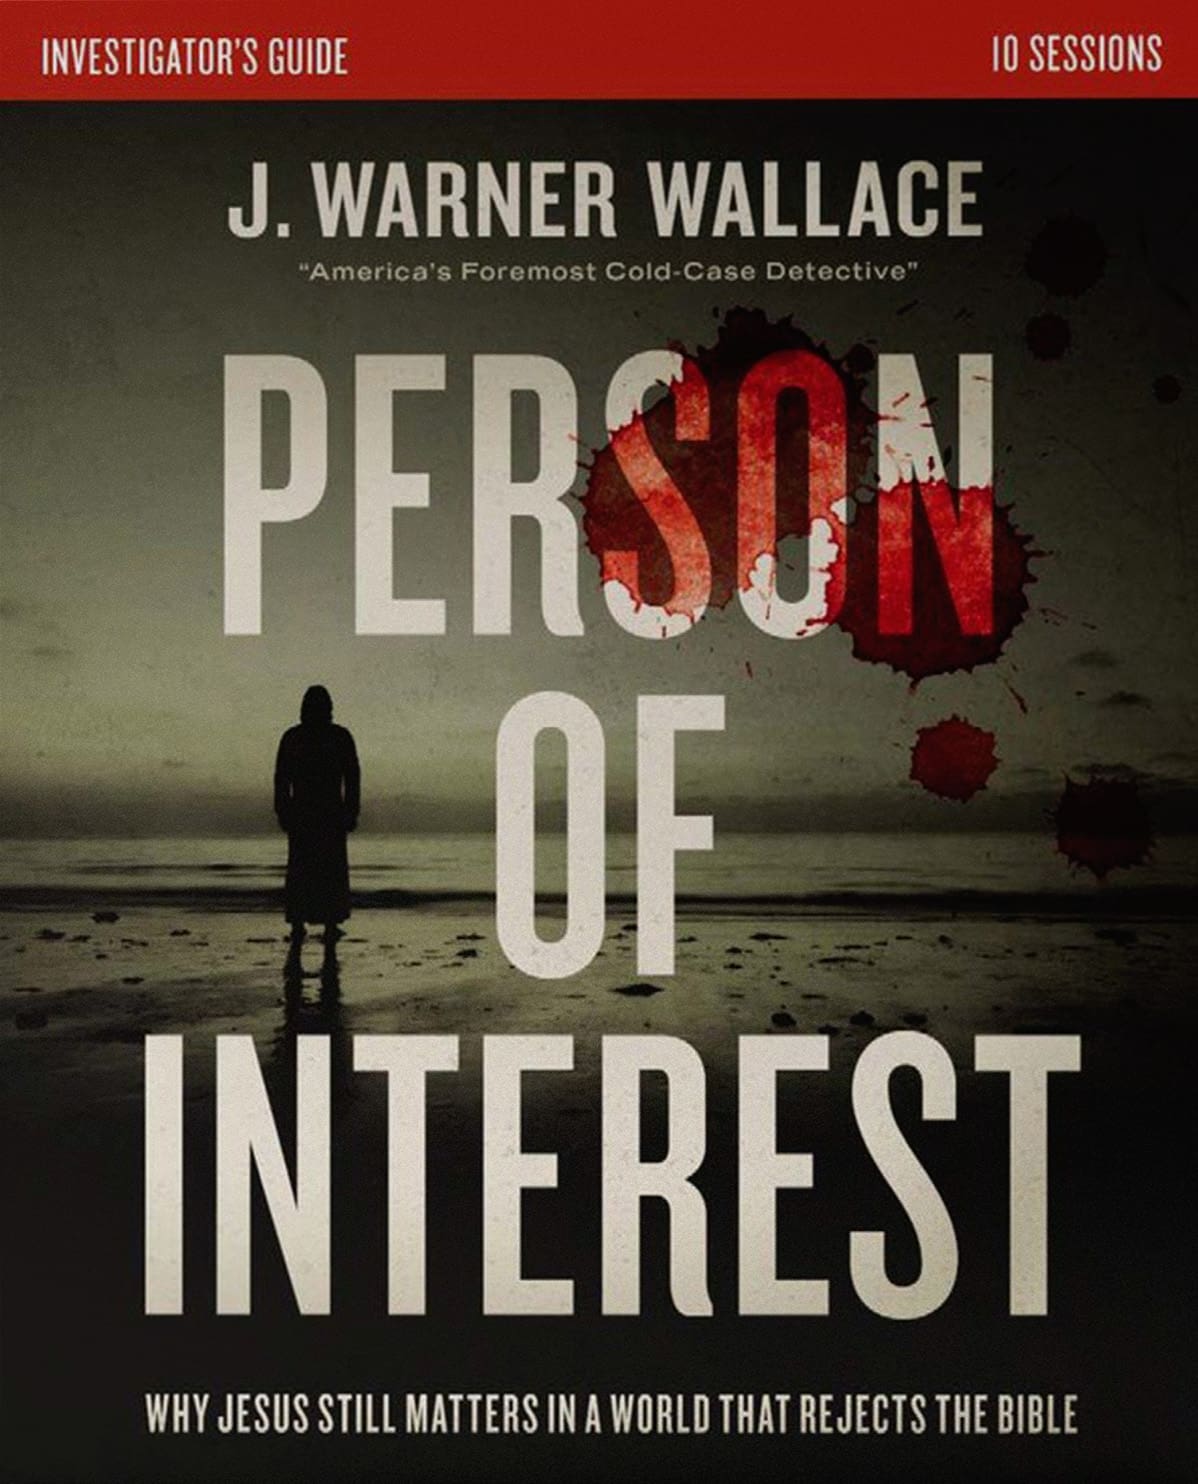 person-of-interest-guide2